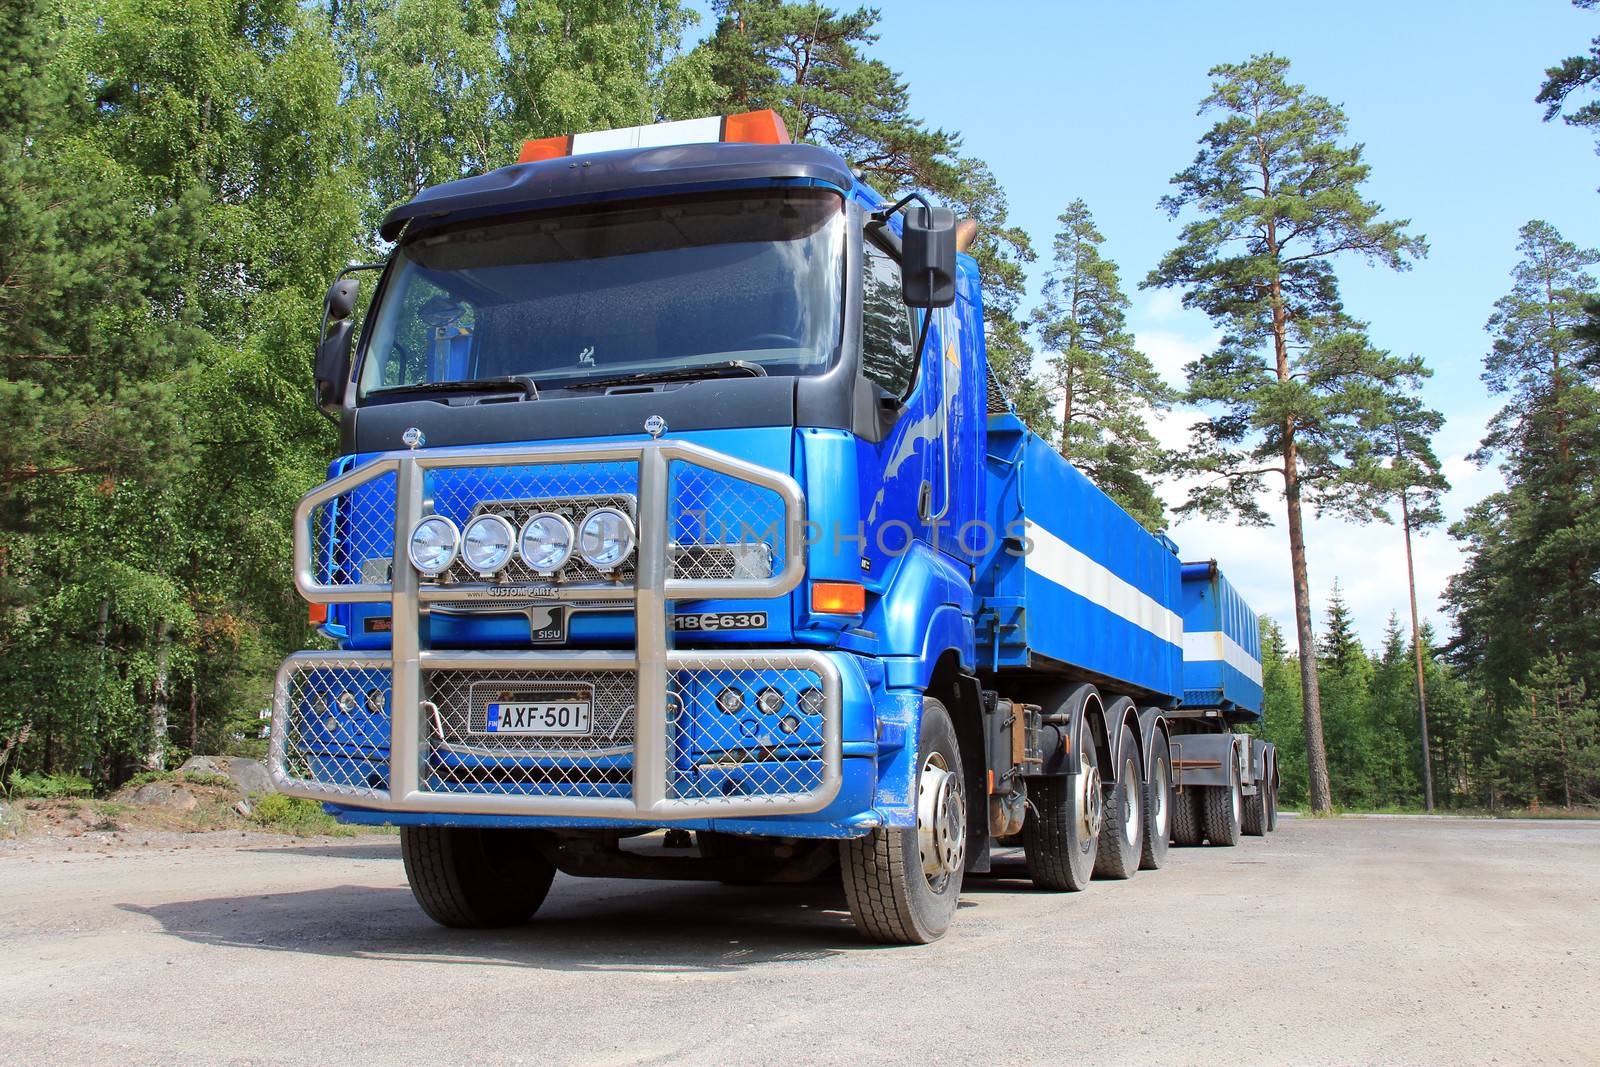 TAMMISAARI, FINLAND - JULY 6, 2013: Sisu 18E630 heavy duty truck parked in Tammisaari, Finland on July 6, 2013. Sisu Auto Finland prepares for a peak in demand for Euro 5 series of trucks due to the new Euro 6 emission regulation coming into force next year.